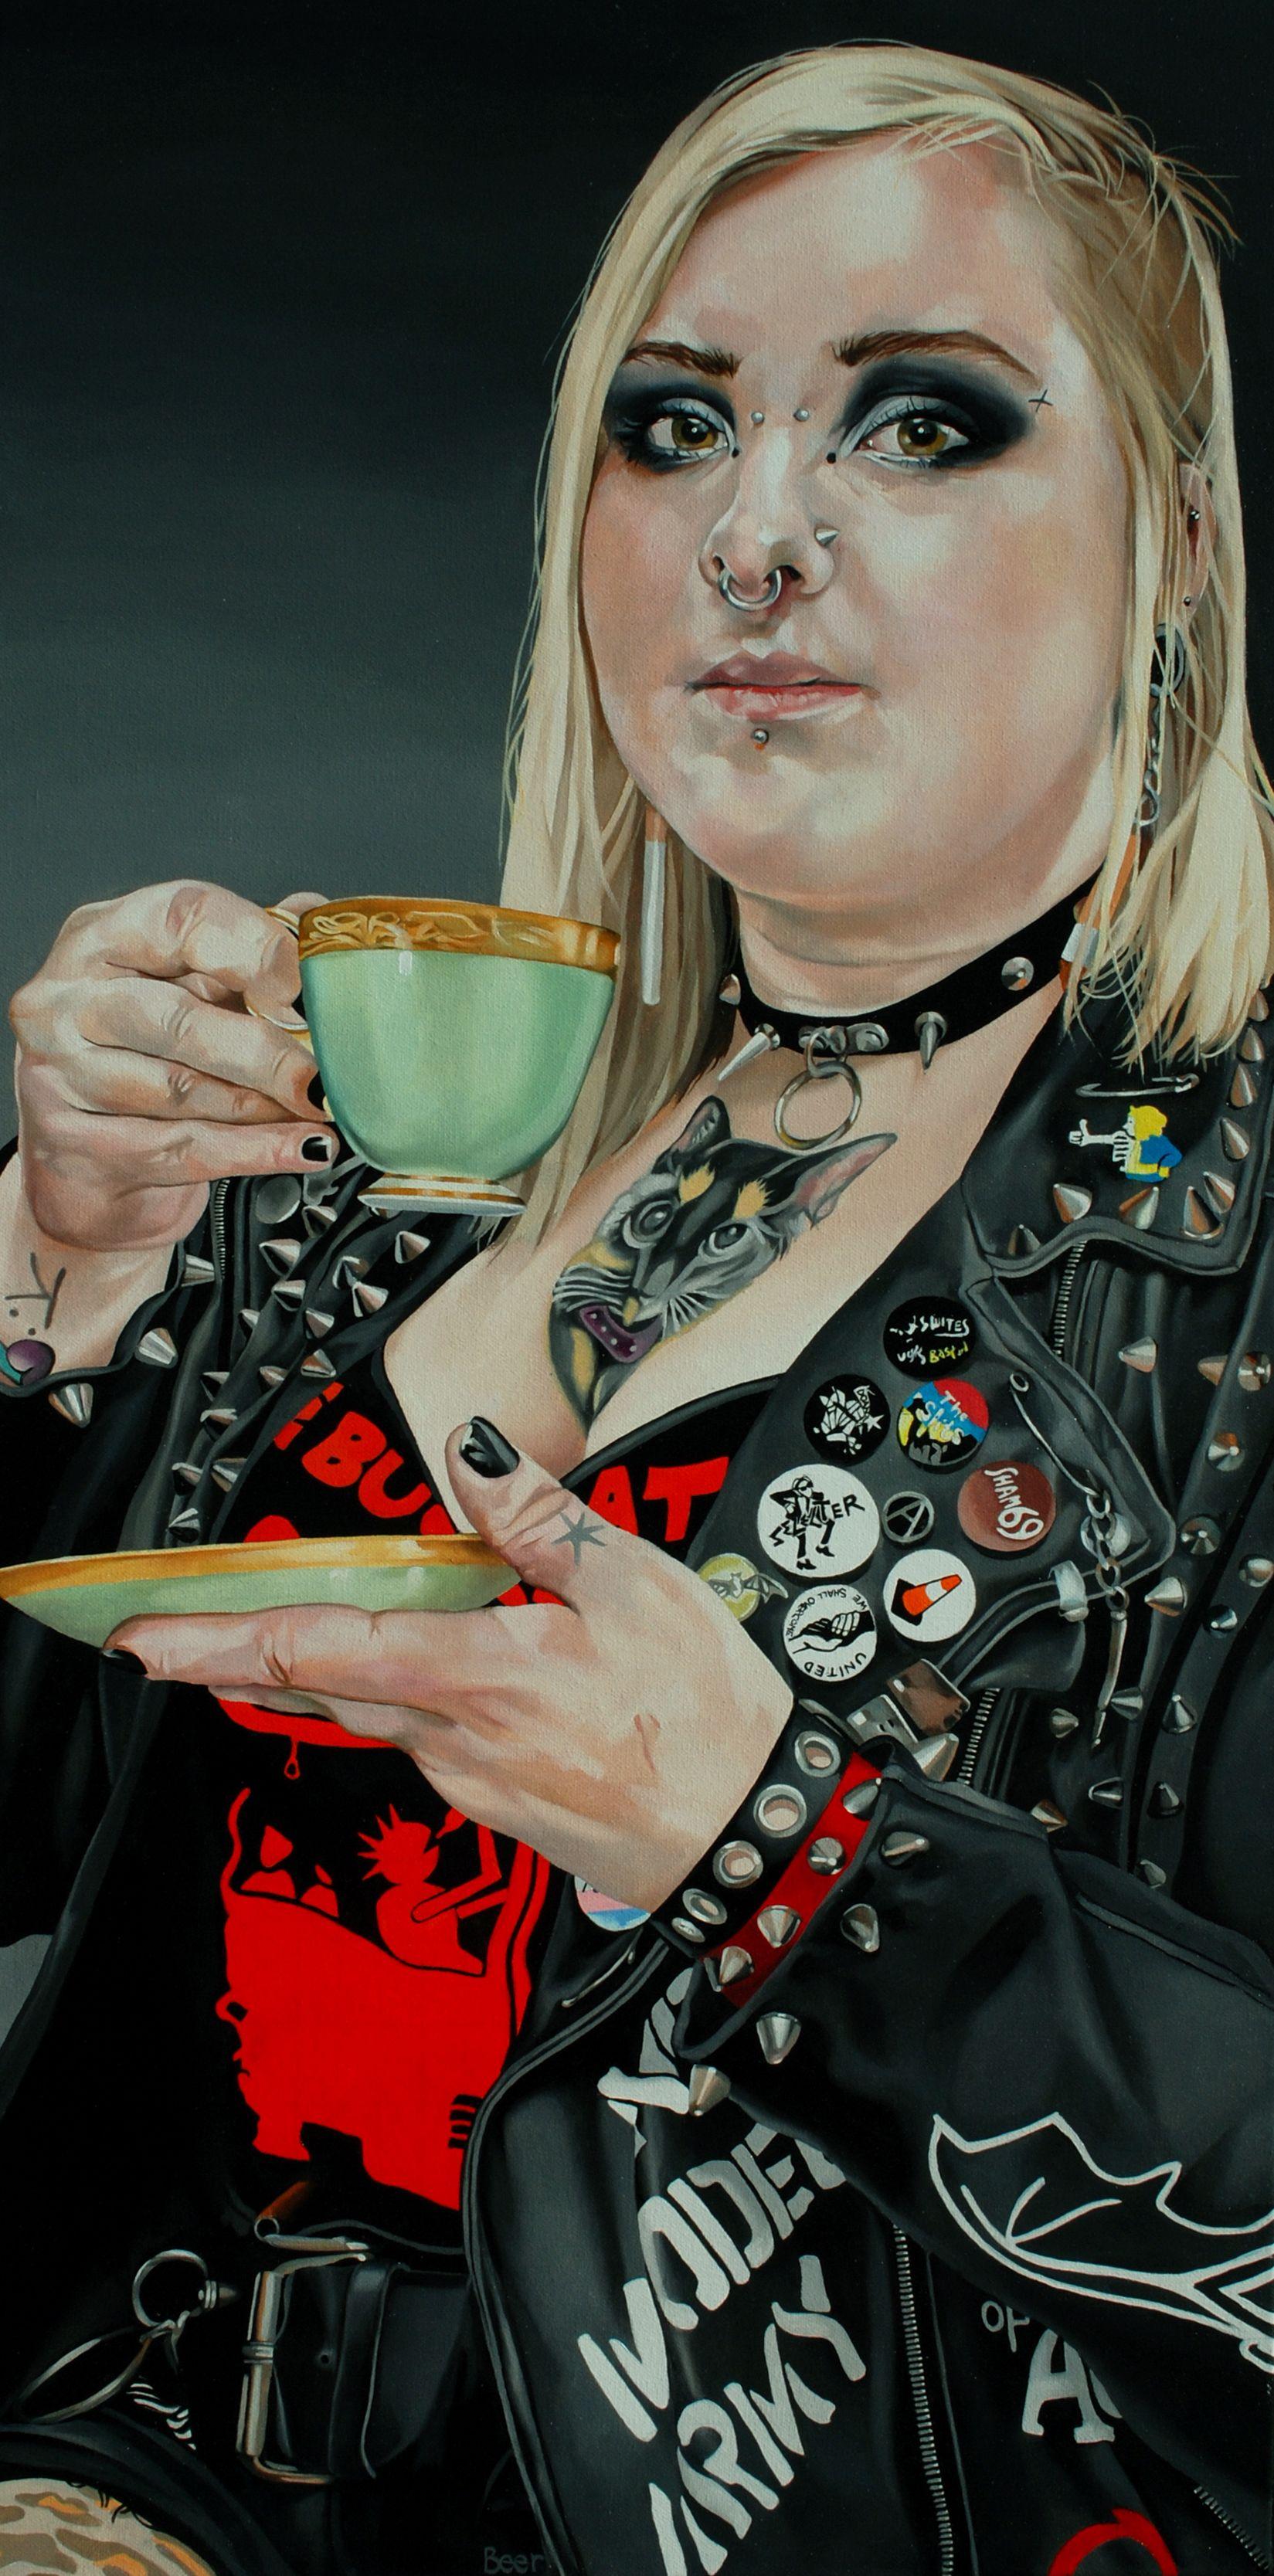 I wanted to paint a punk drinking a cup of tea...those two things say 'British' to me. I found this beautiful china teacup & saucer in an antique shop and thought that it would provide a nice contrast in that composition.  Billi is a talented